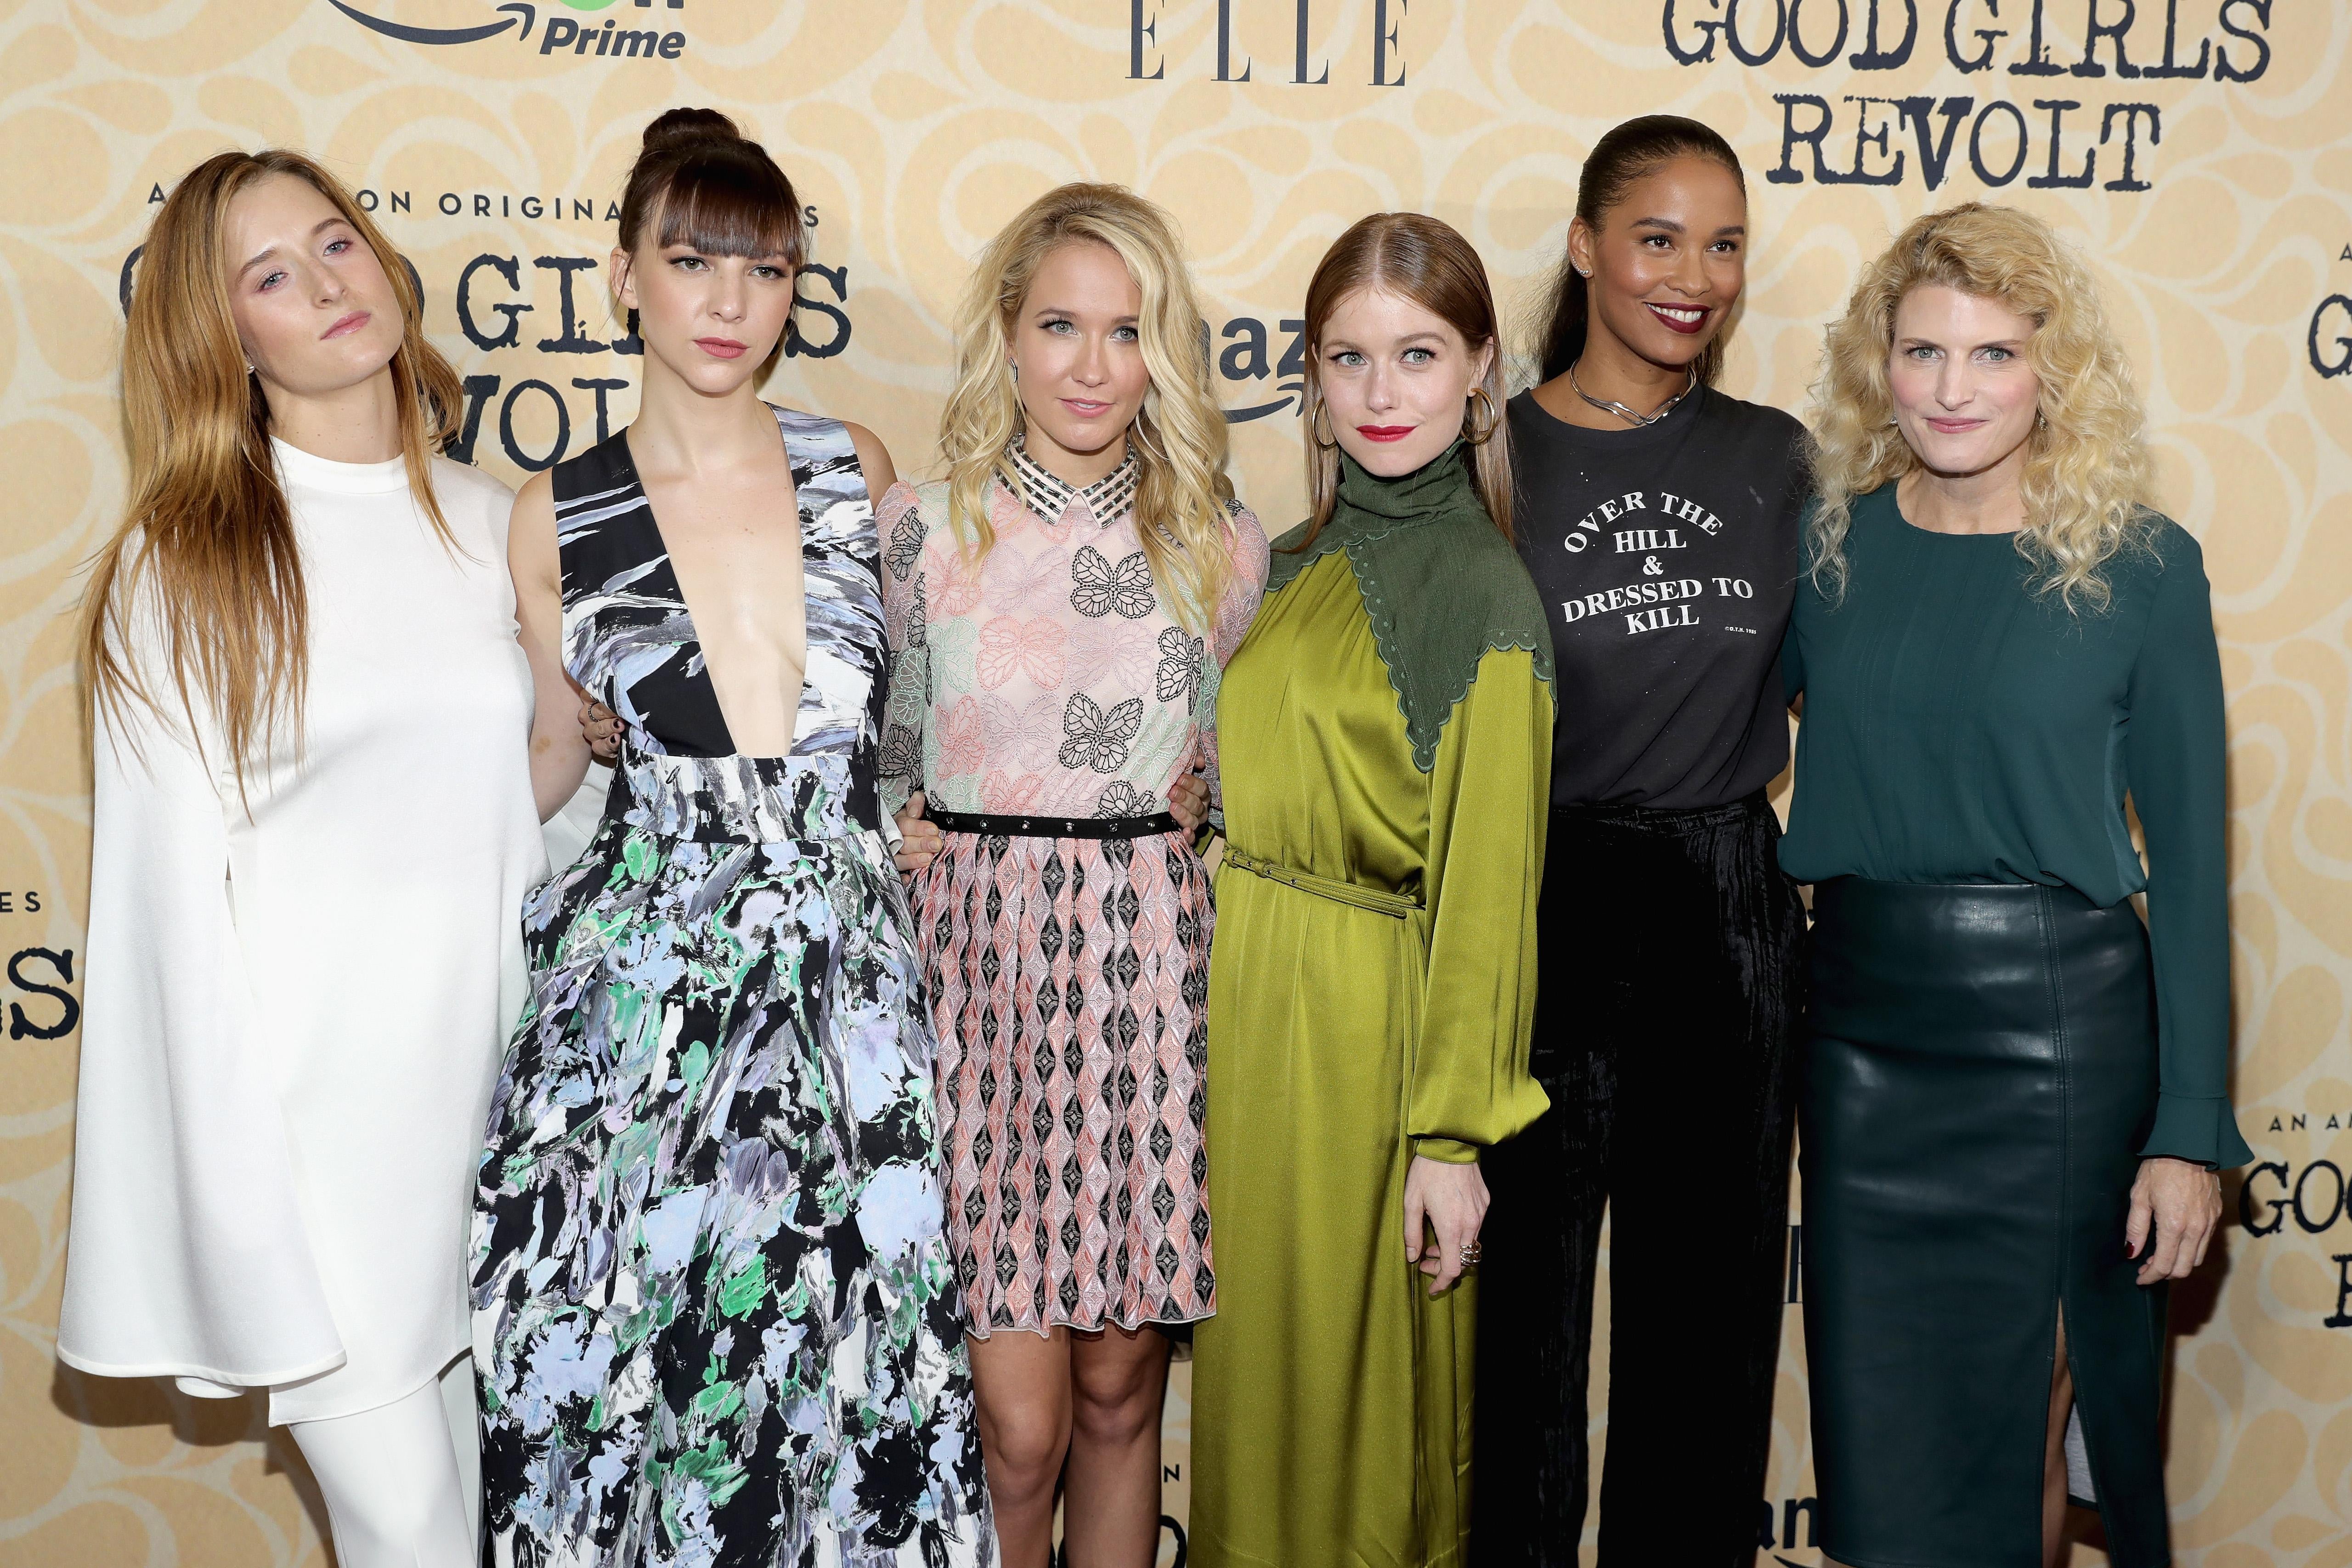 (L-R) Grace Gummer, Erin Darke, Anna Camp, Genevieve Angelson, Joy Bryant and Lynn Povich attend the 'Good Girls Revolt' New York Screening at the Joseph Urban Theater at Hearst Tower on October 18, 2016 in New York City.  (Photo by Neilson Barnard/Getty Images)